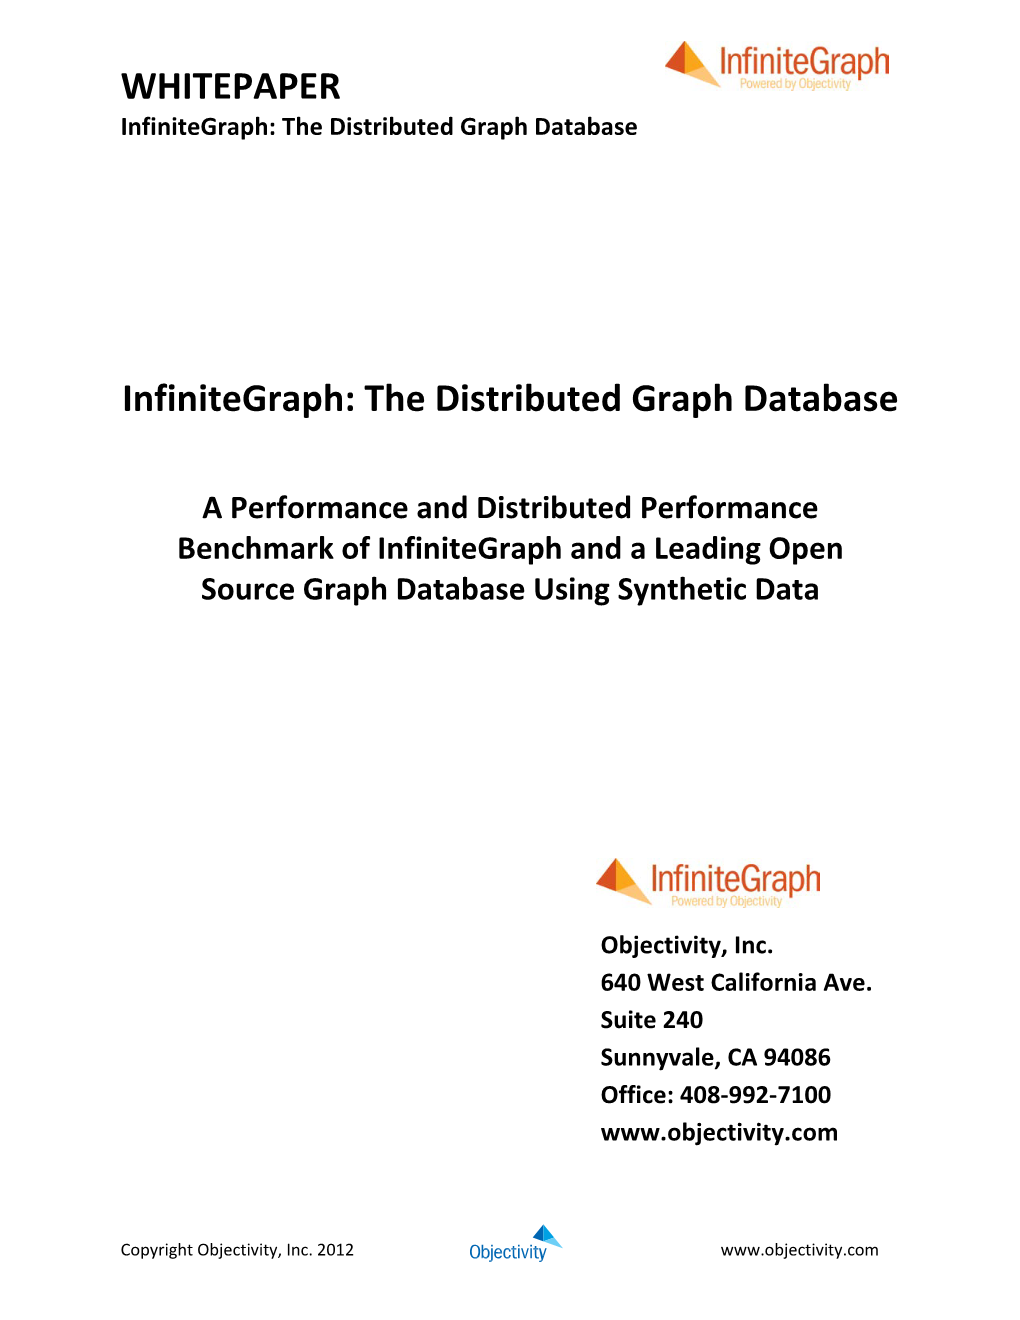 The Distributed Graph Database